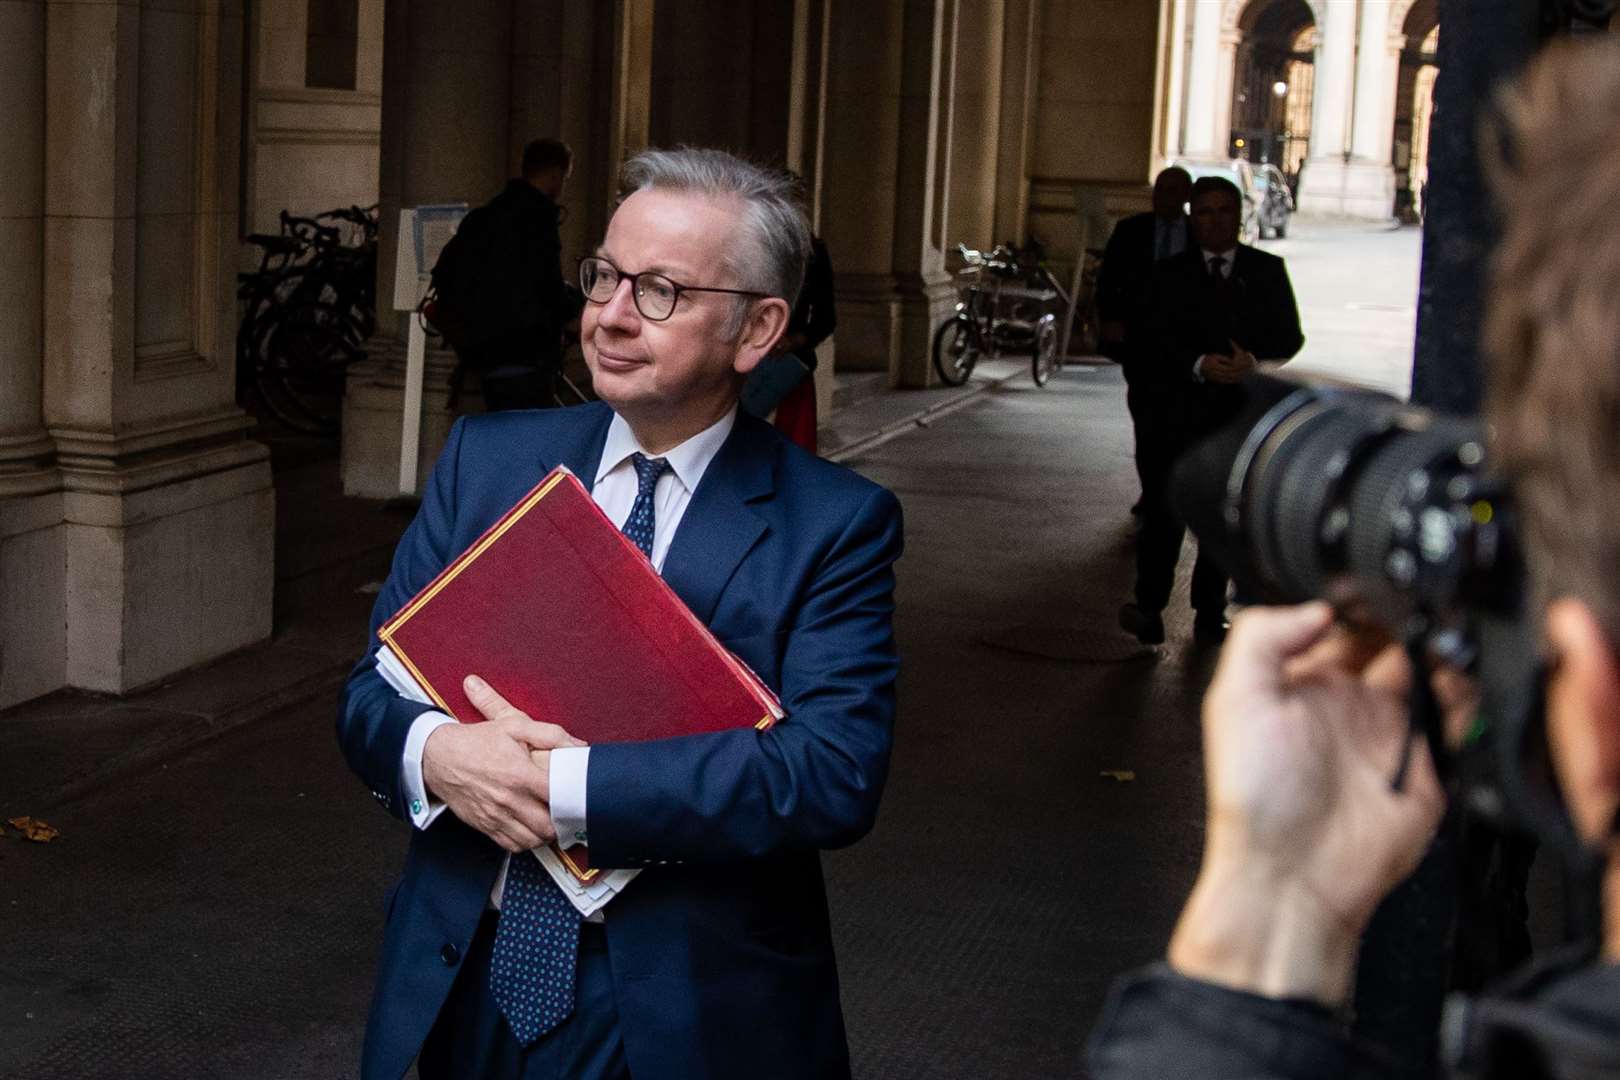 Michael Gove said Government departments should be relocated outside of London (Aaron Chown/PA)